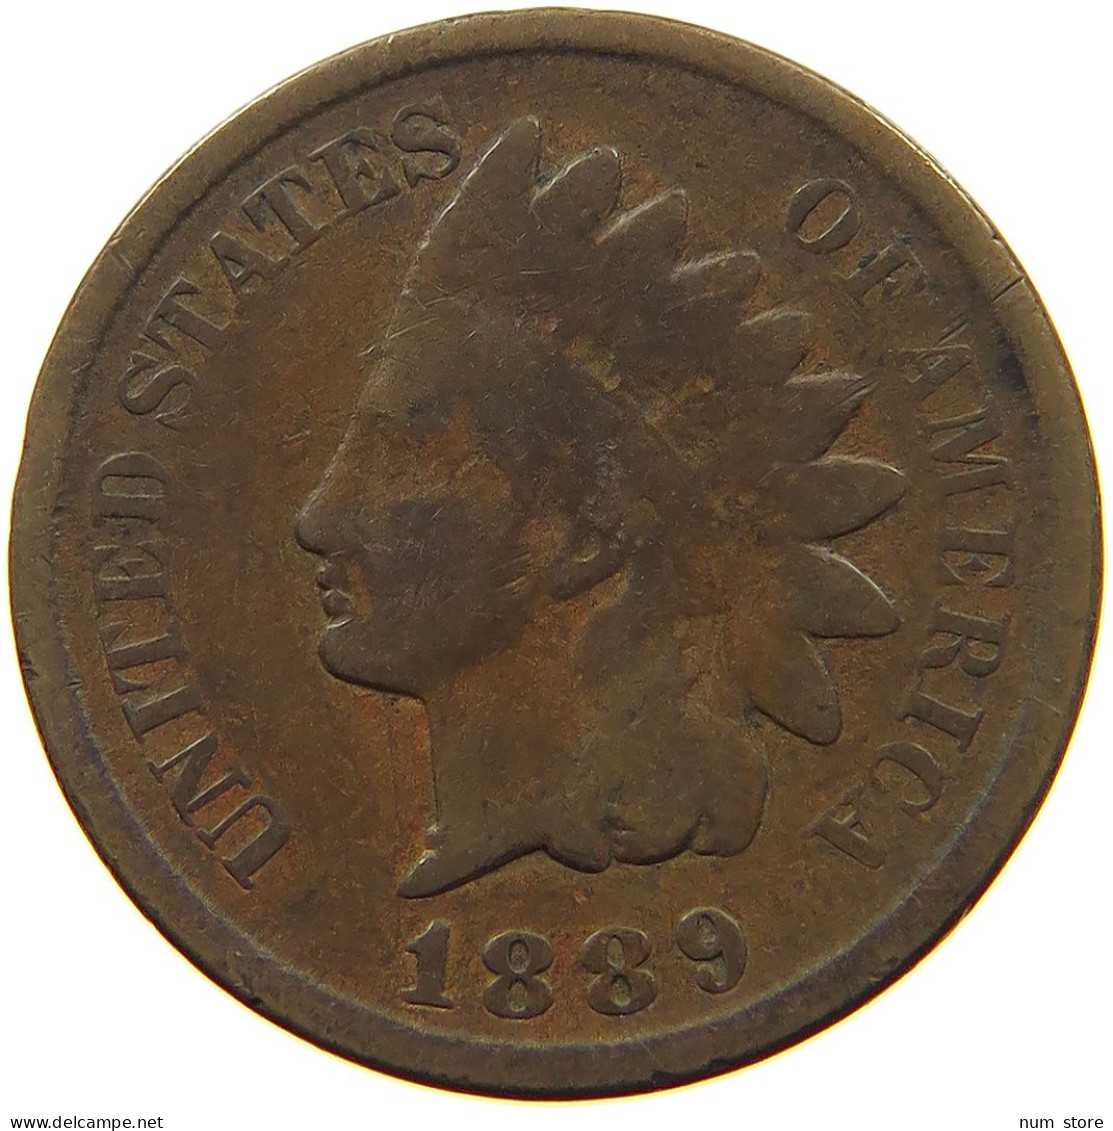 UNITED STATES OF AMERICA CENT 1889 INDIAN HEAD #a094 0279 - 1859-1909: Indian Head